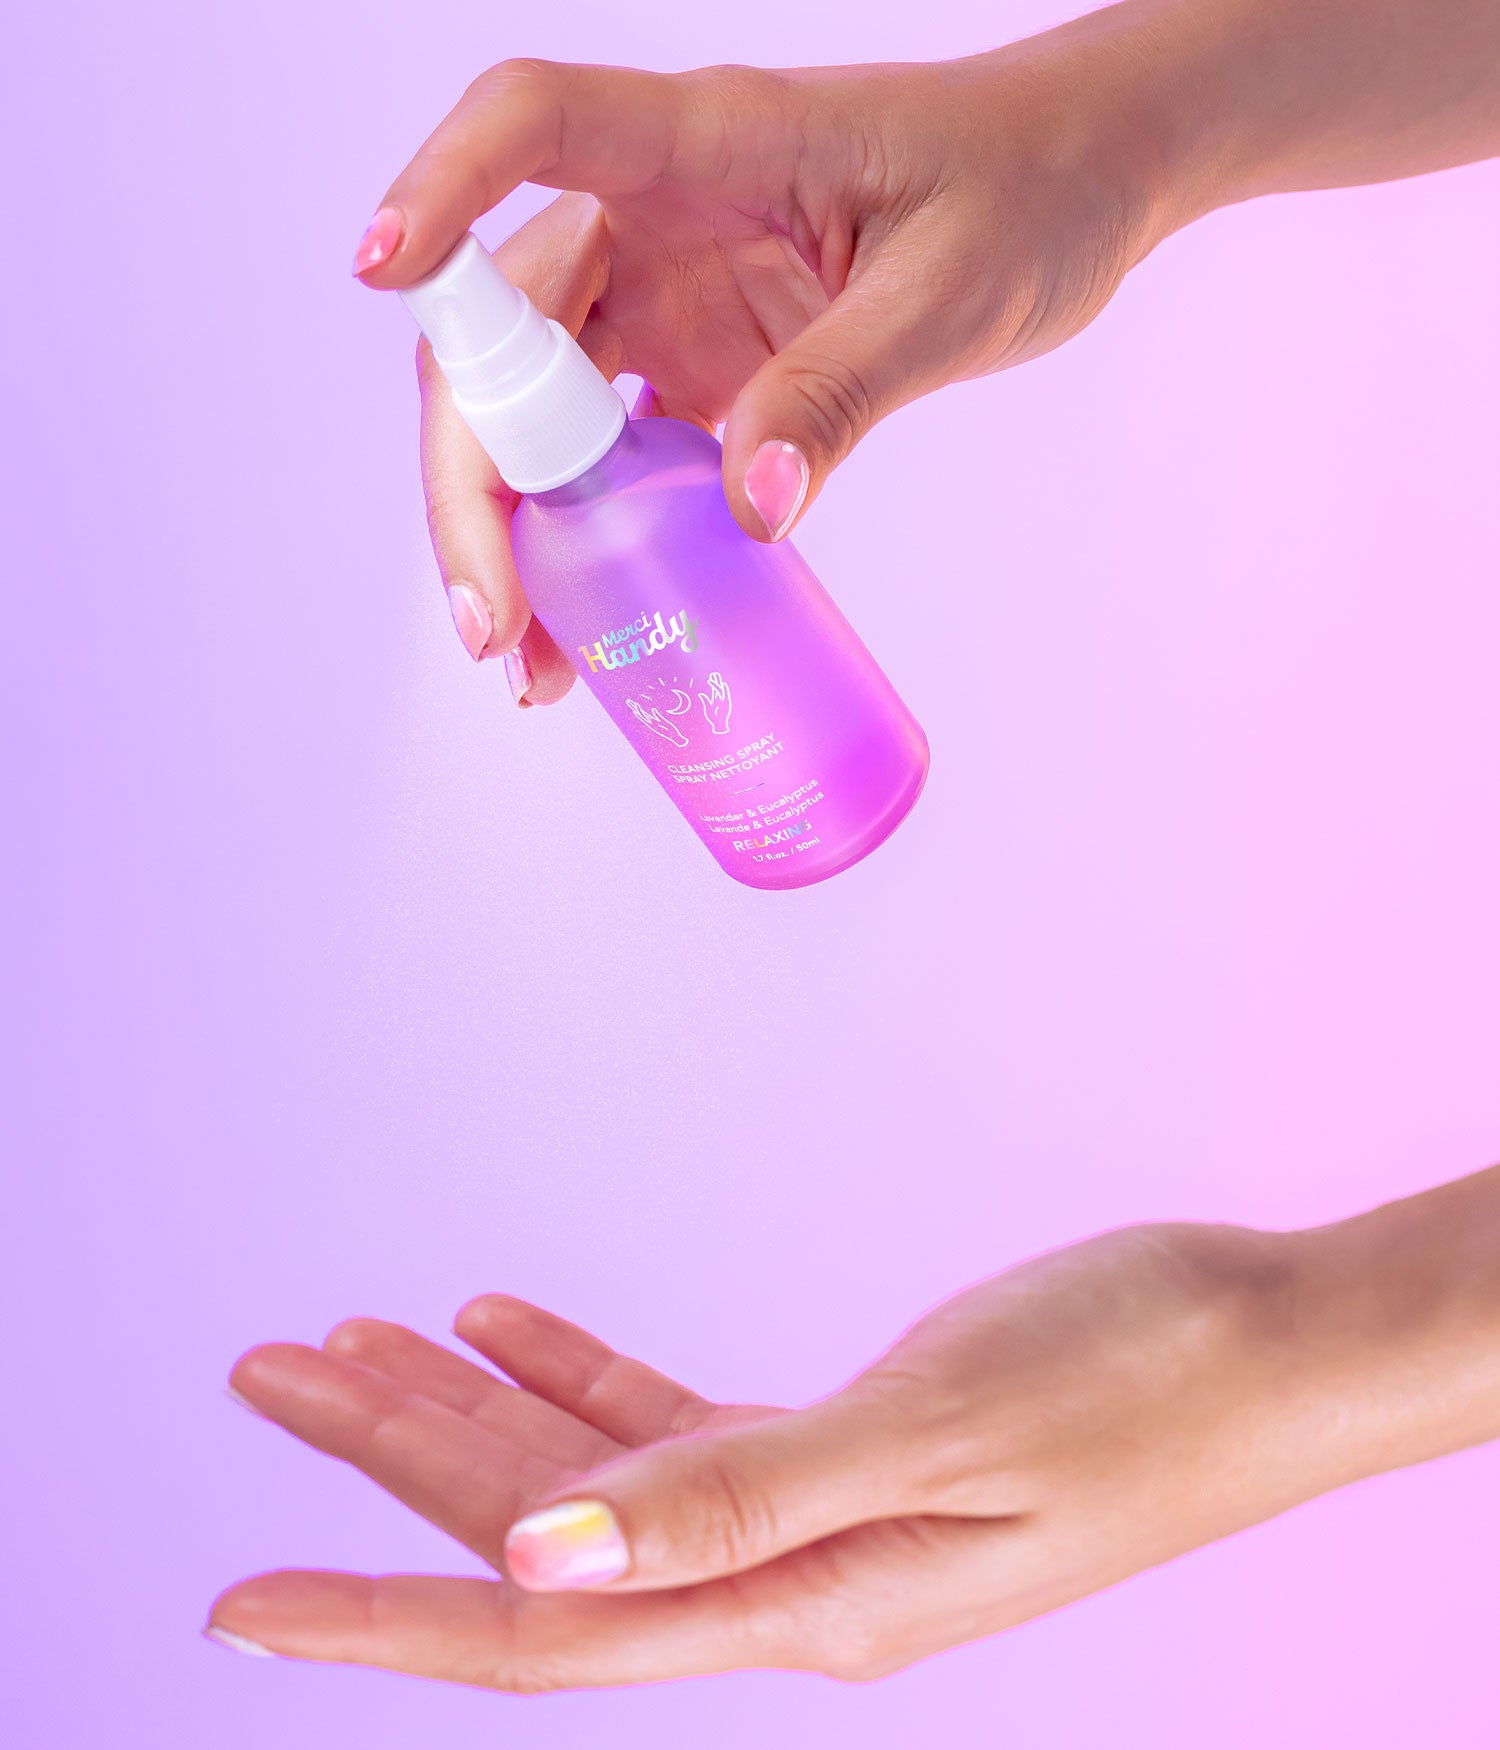 Relaxing Hand Cleansing Spray